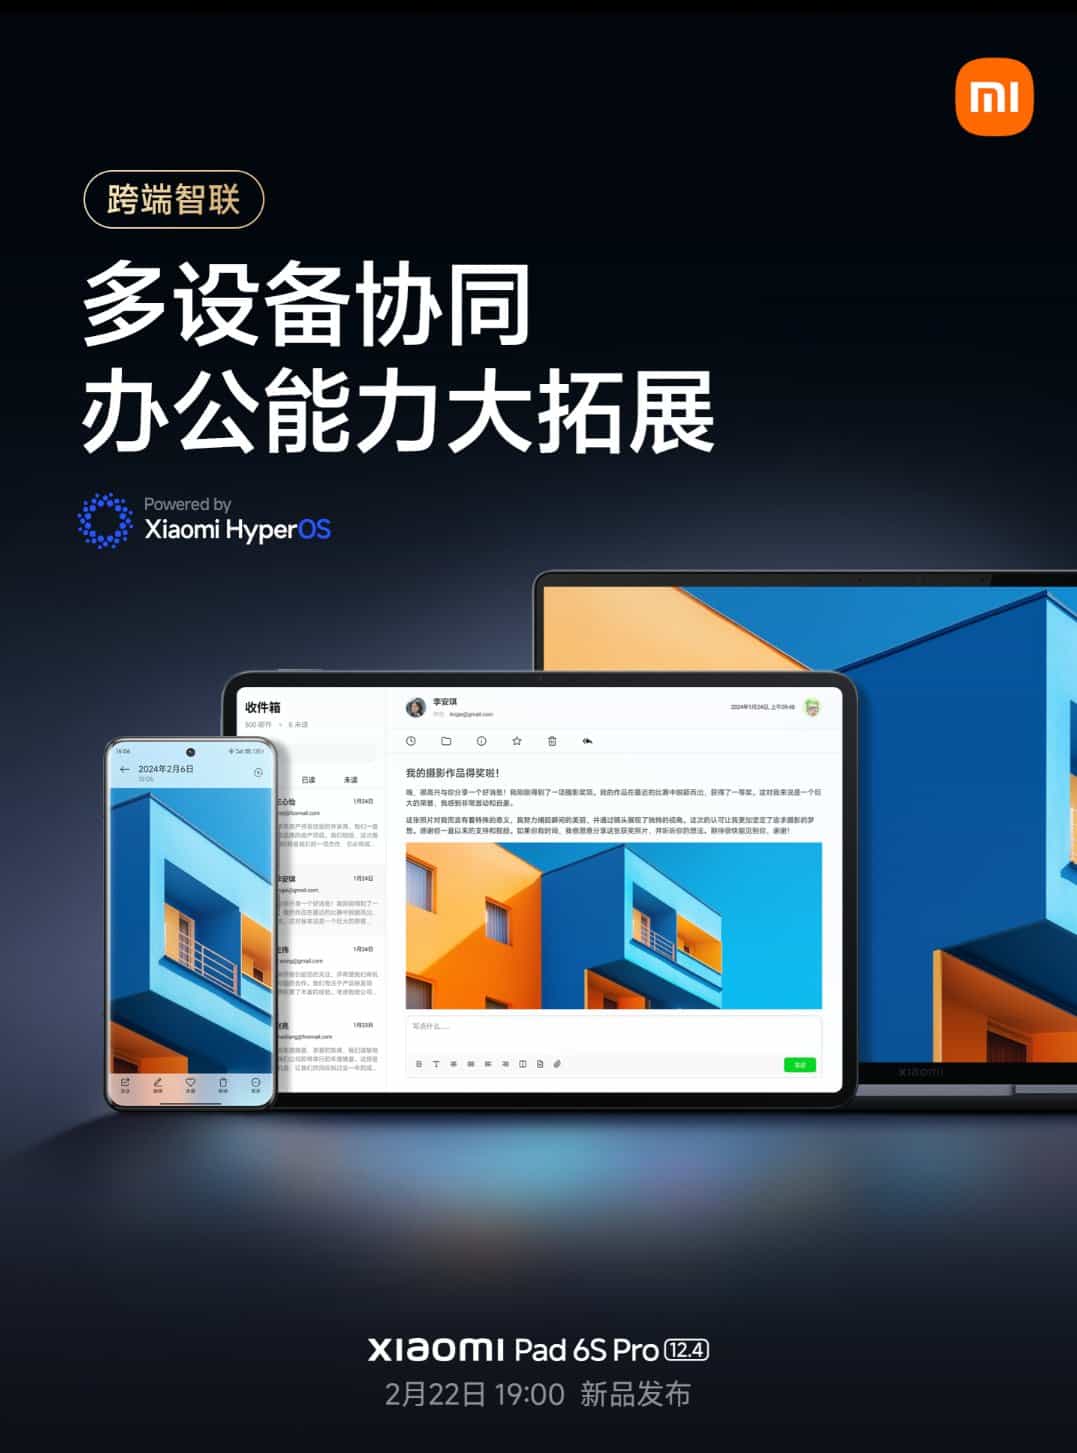 Xiaomi Pad 6S Pro - Software Features - 1